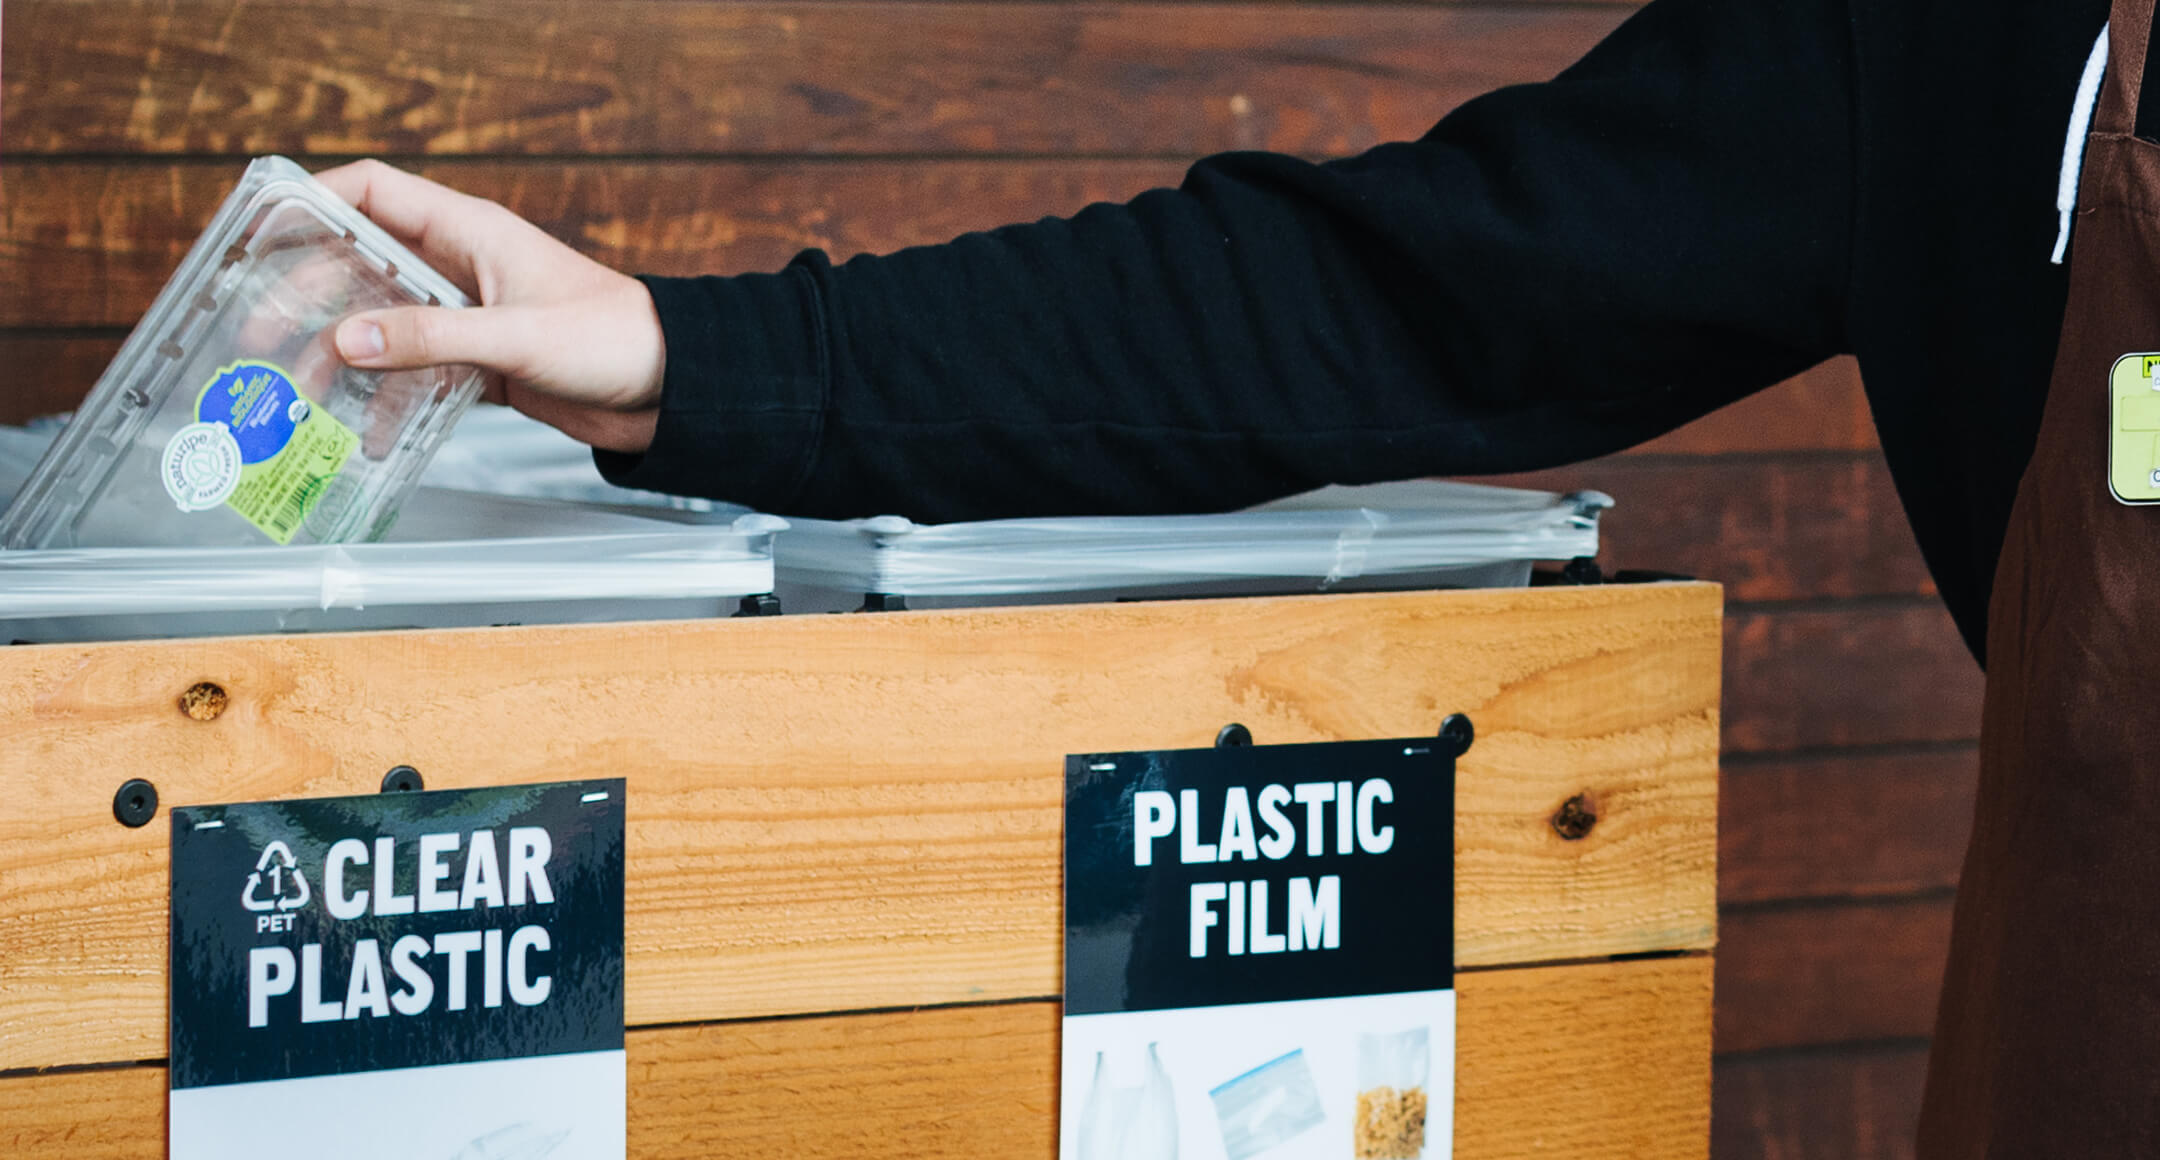 An image showing an individual placing an empty plastic container in a designated recycling bin.